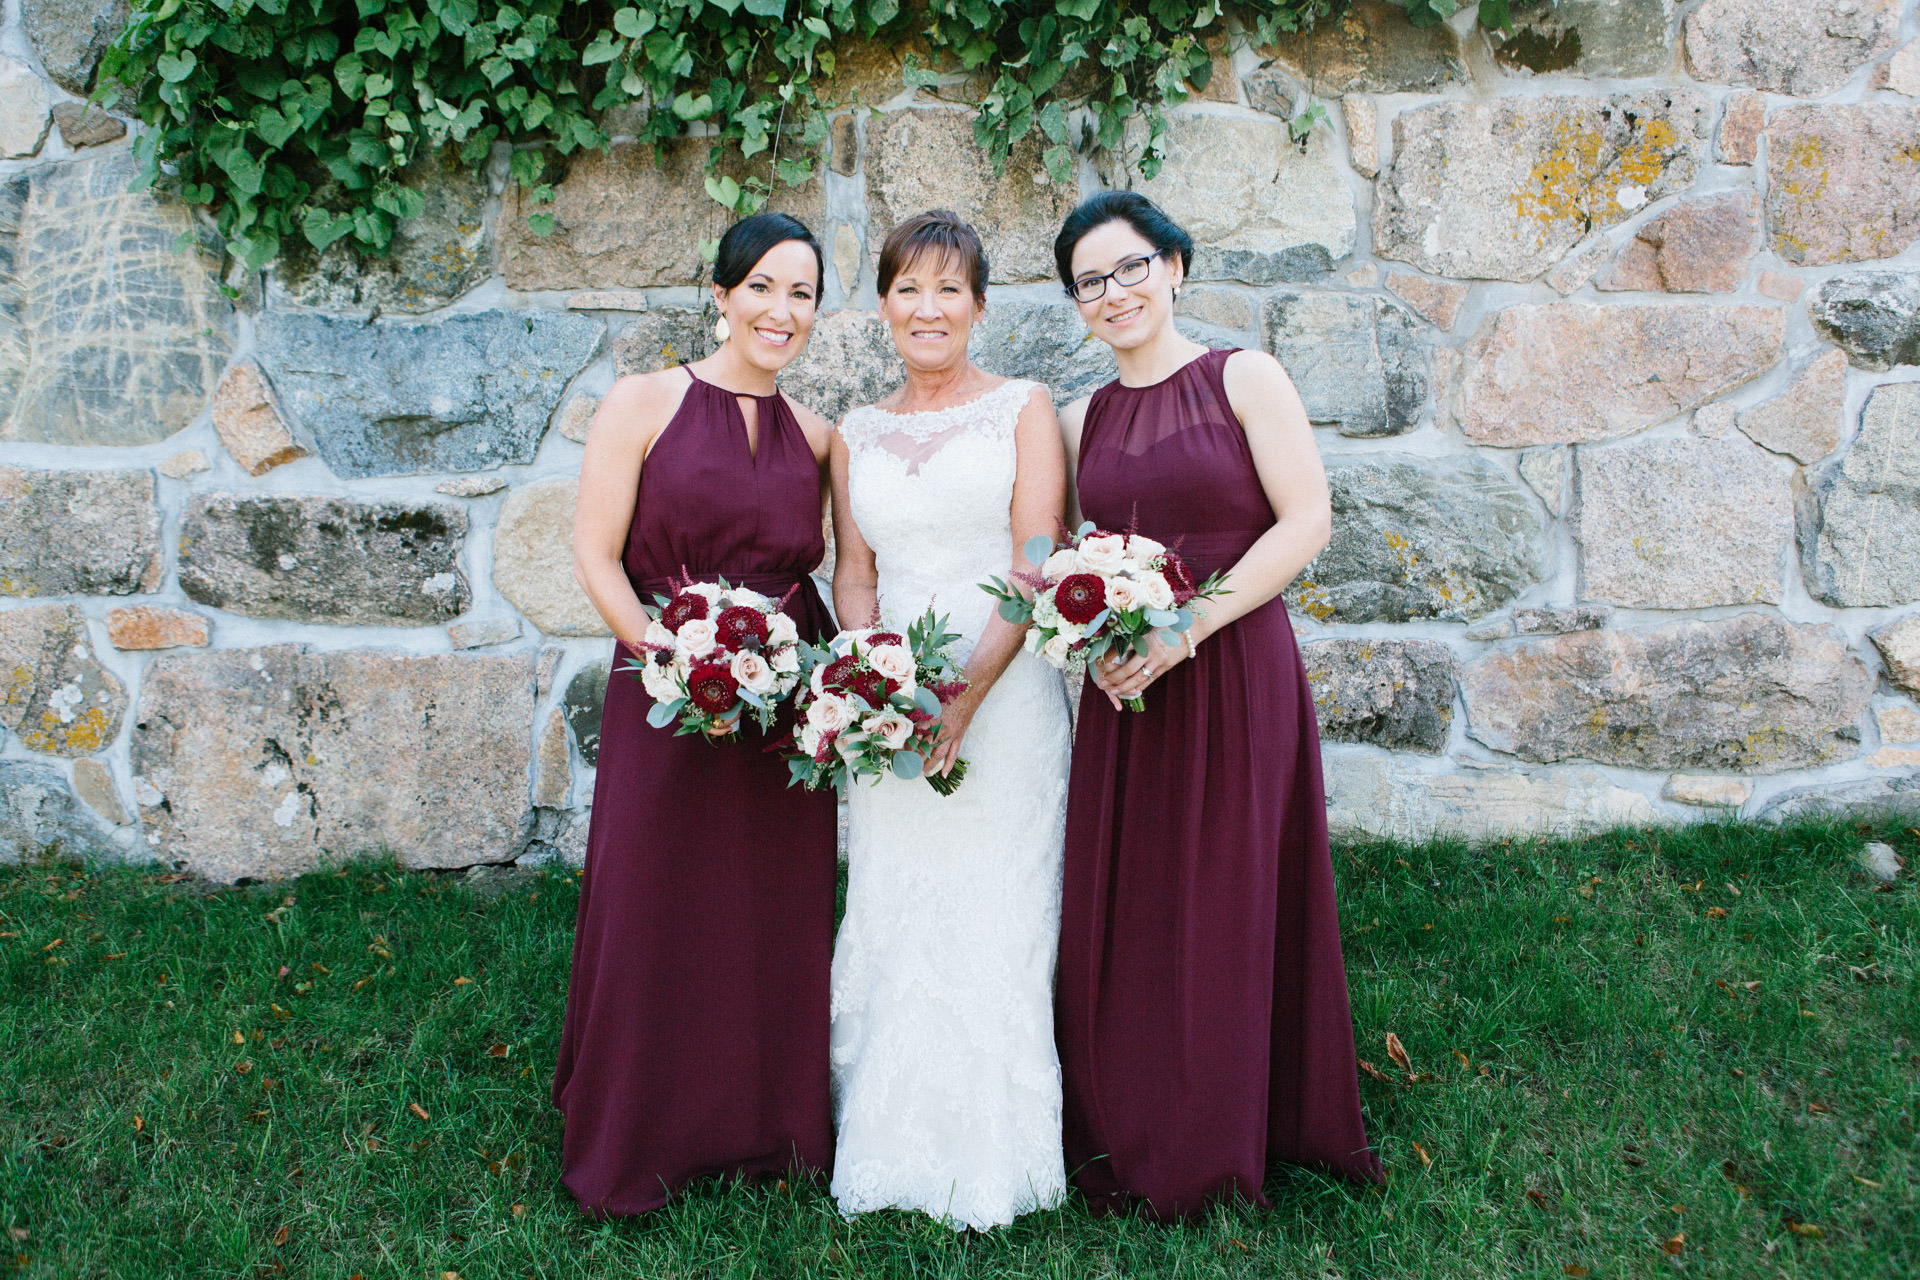 Bride and bridesmaids in a formal photo